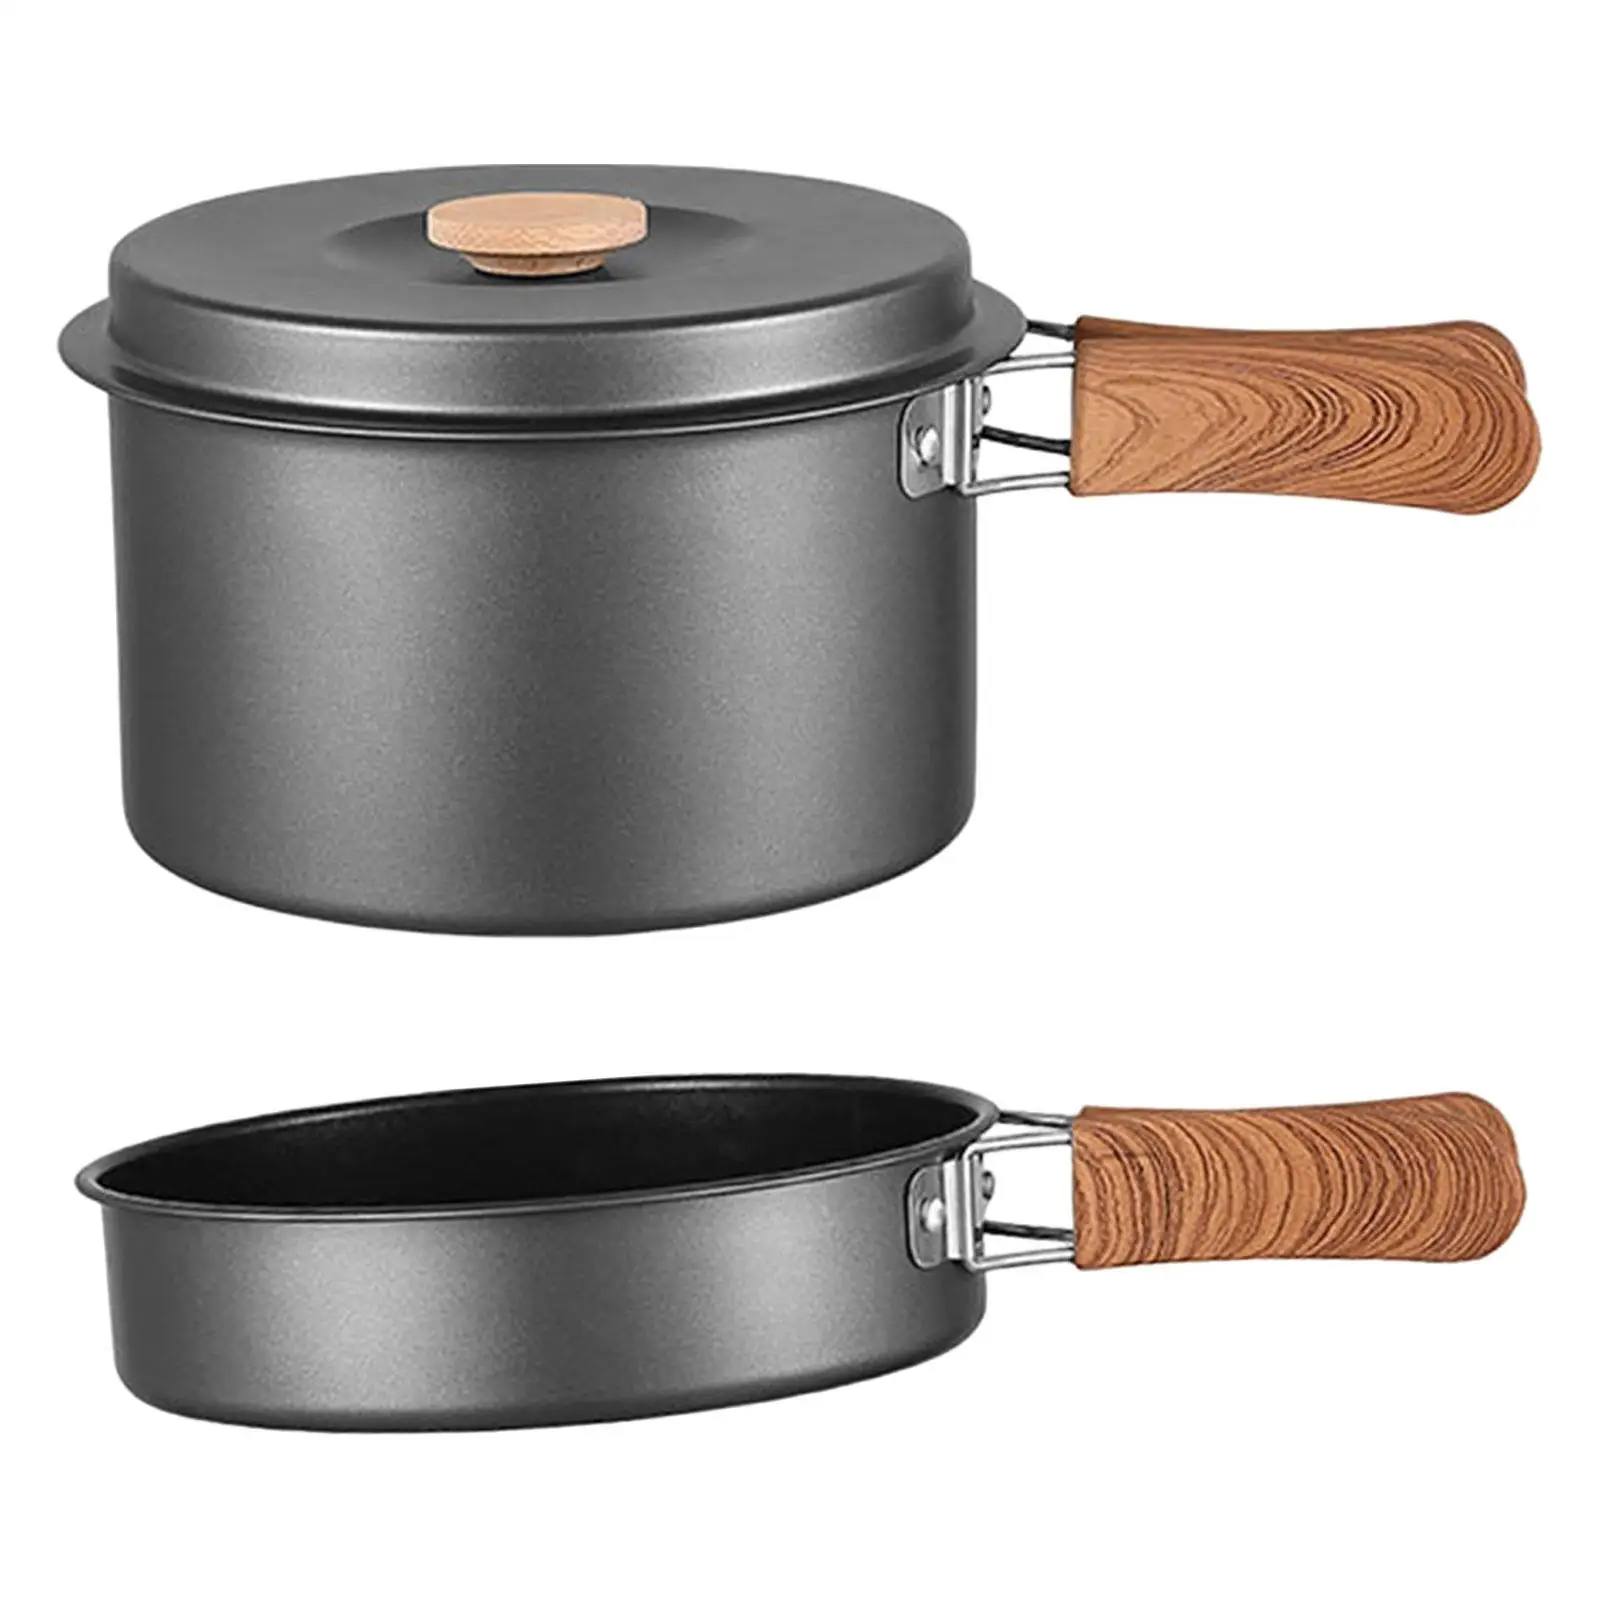 Camping Pot Campfire Kettle Multifunctional Pot with Foldable Handle Cookware